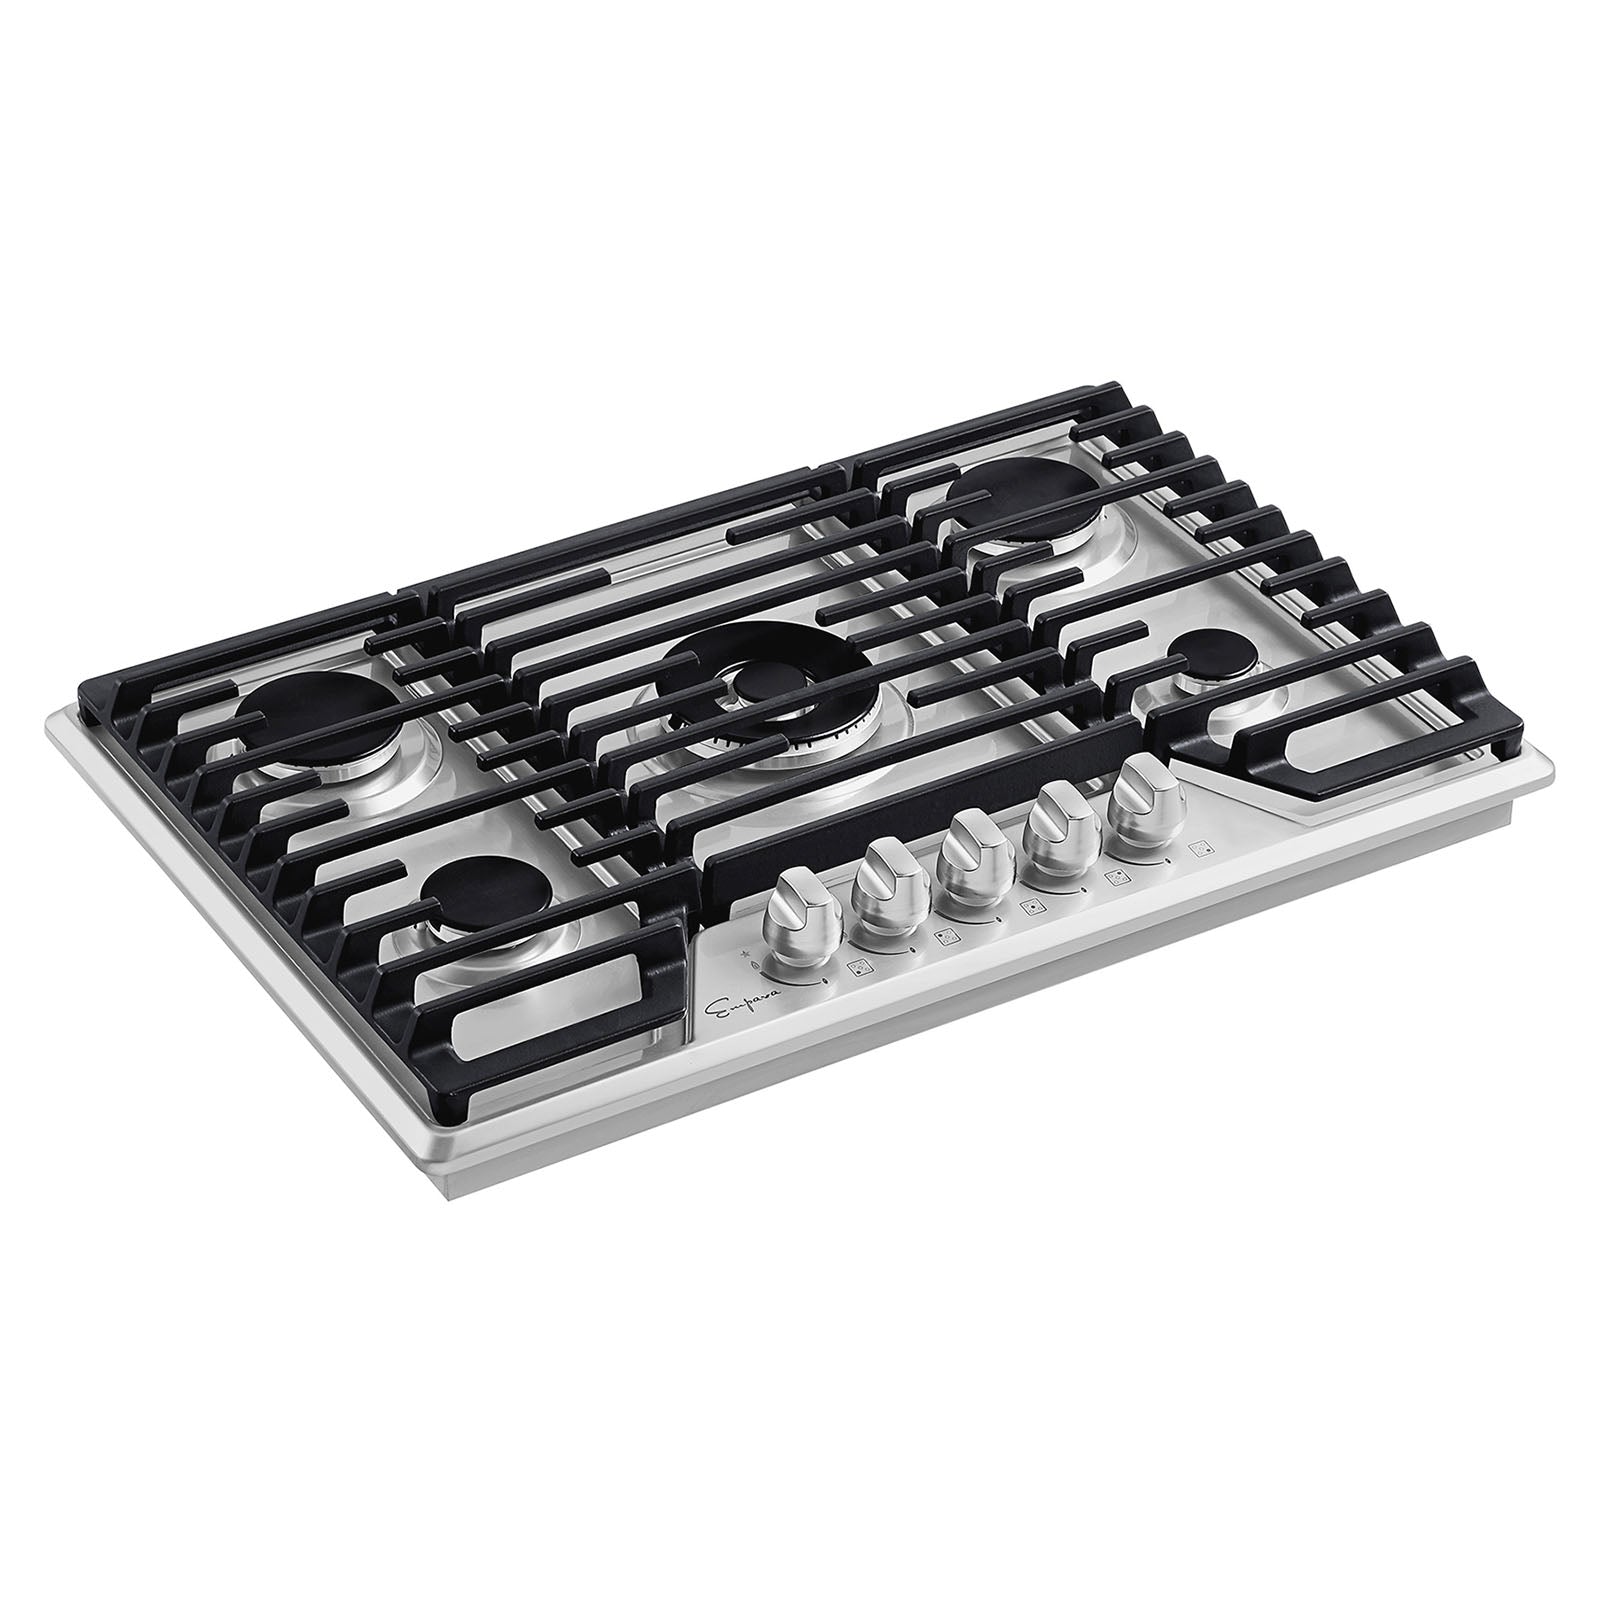 Empava 36 In. Built-in Gas Stove Cooktop